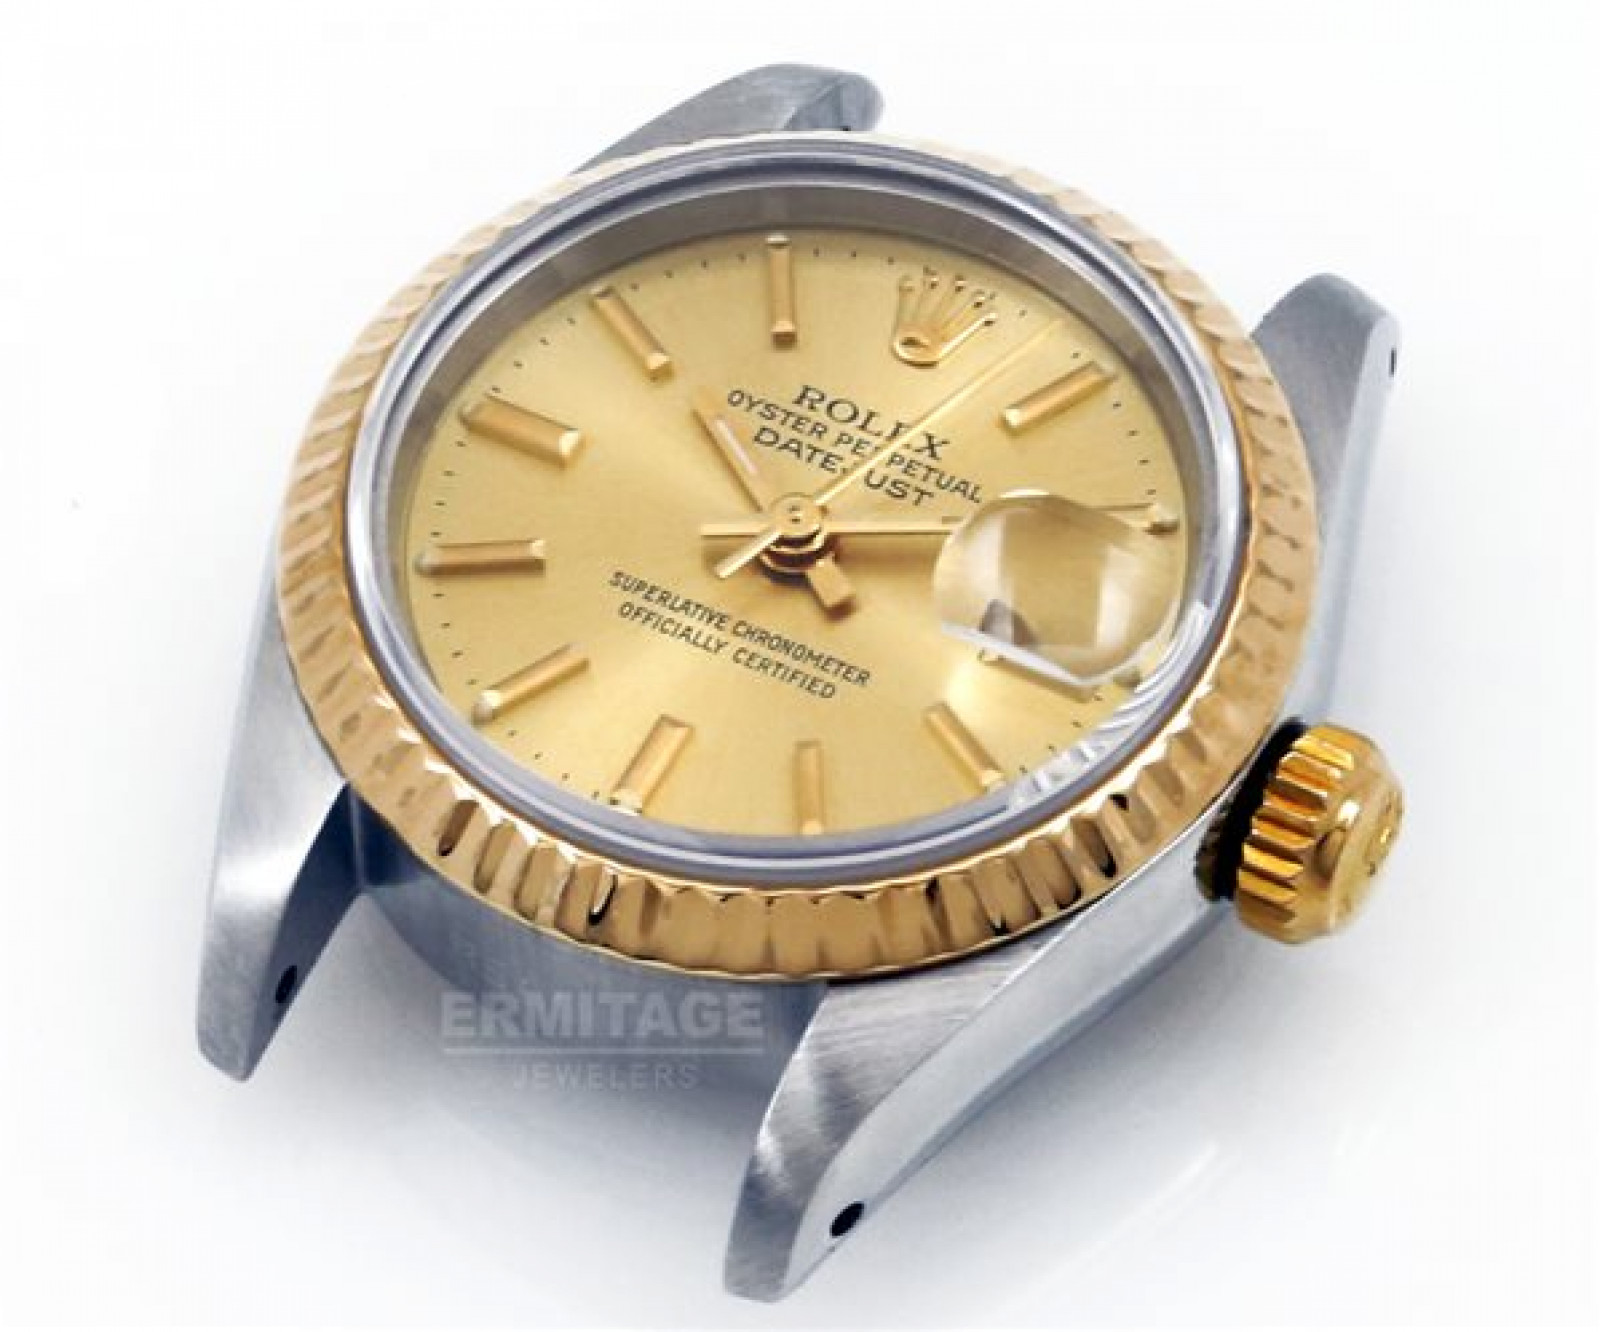 Pre-Owned Gold & Steel Rolex Datejust 69173 Year 1987